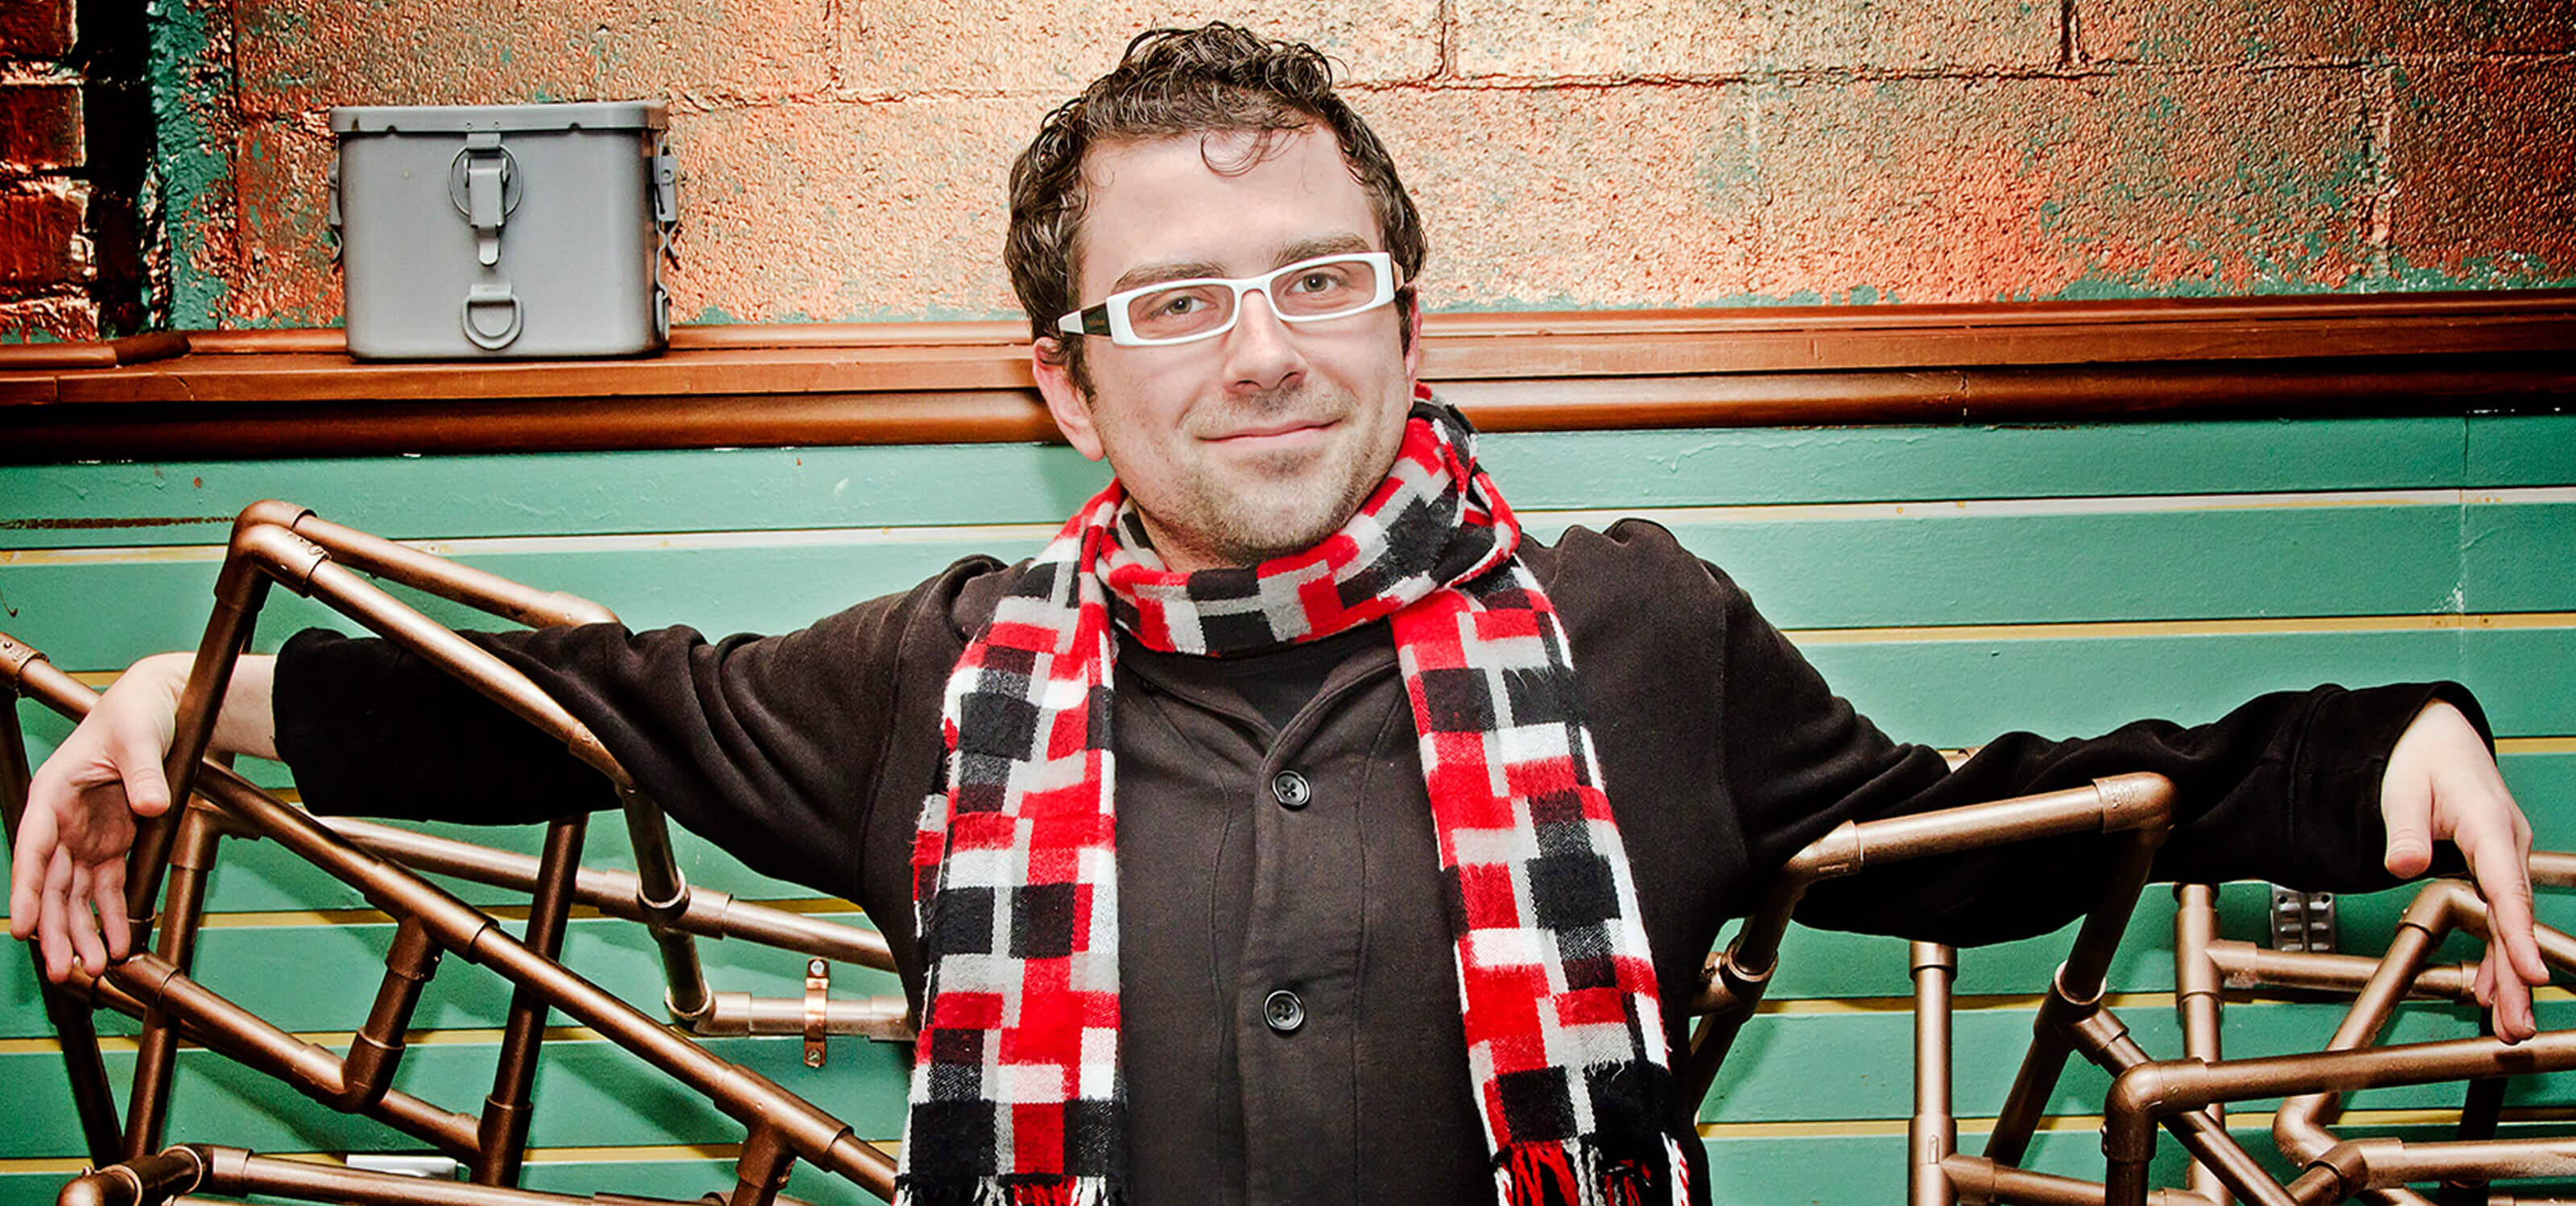 DigiPen alumnus Nate Martin in a plaid scarf, black coat and white-framed glasses with a prop made of bronze-colored pipes